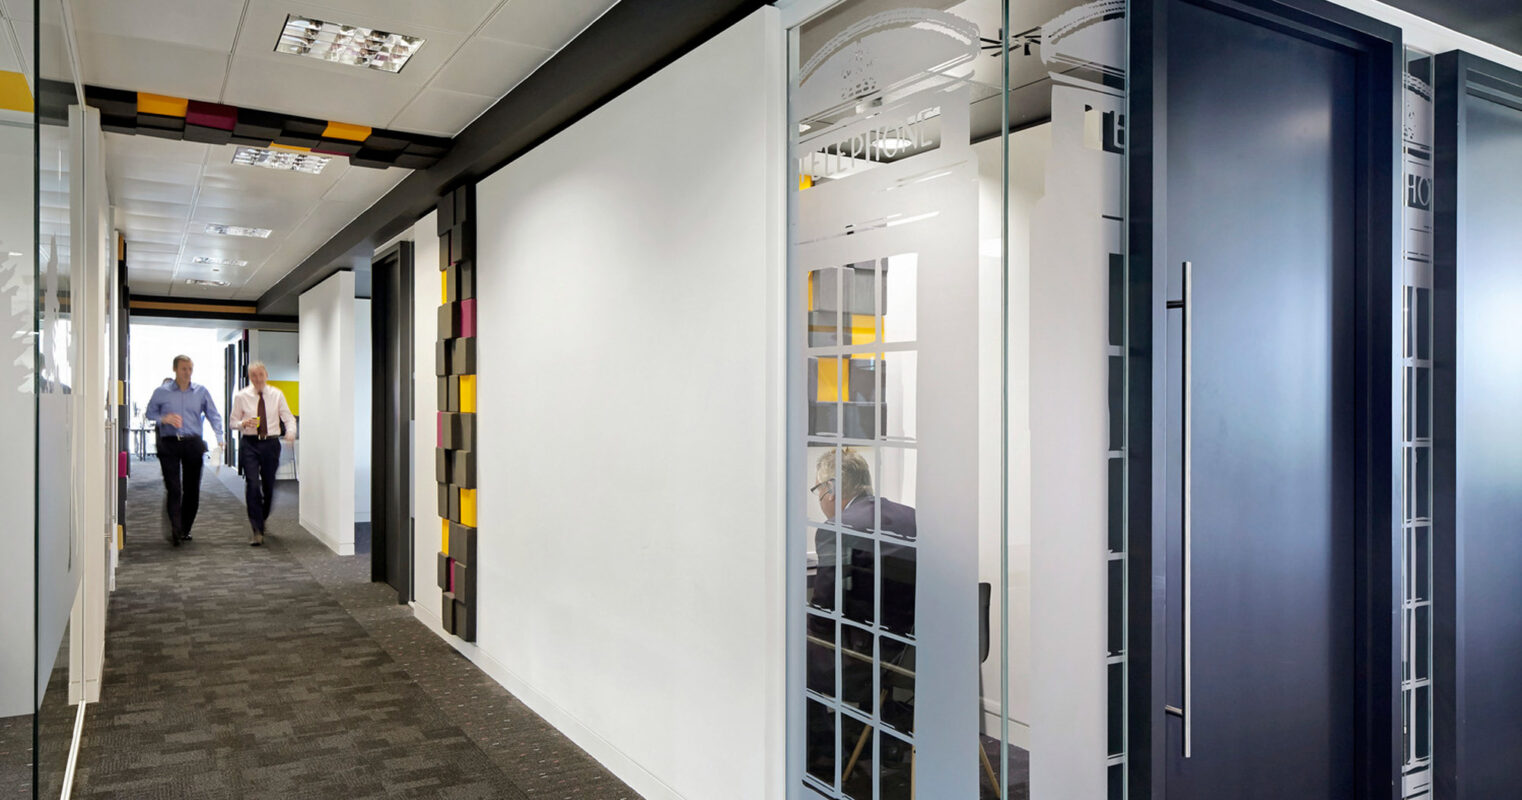 Modern office interior featuring a neutral color palette with splashes of color from rectangular wall panels. Glass partitions with metallic frames provide transparency. Slat ceilings and recessed lighting accentuate the elongated hallway where office workers move about.